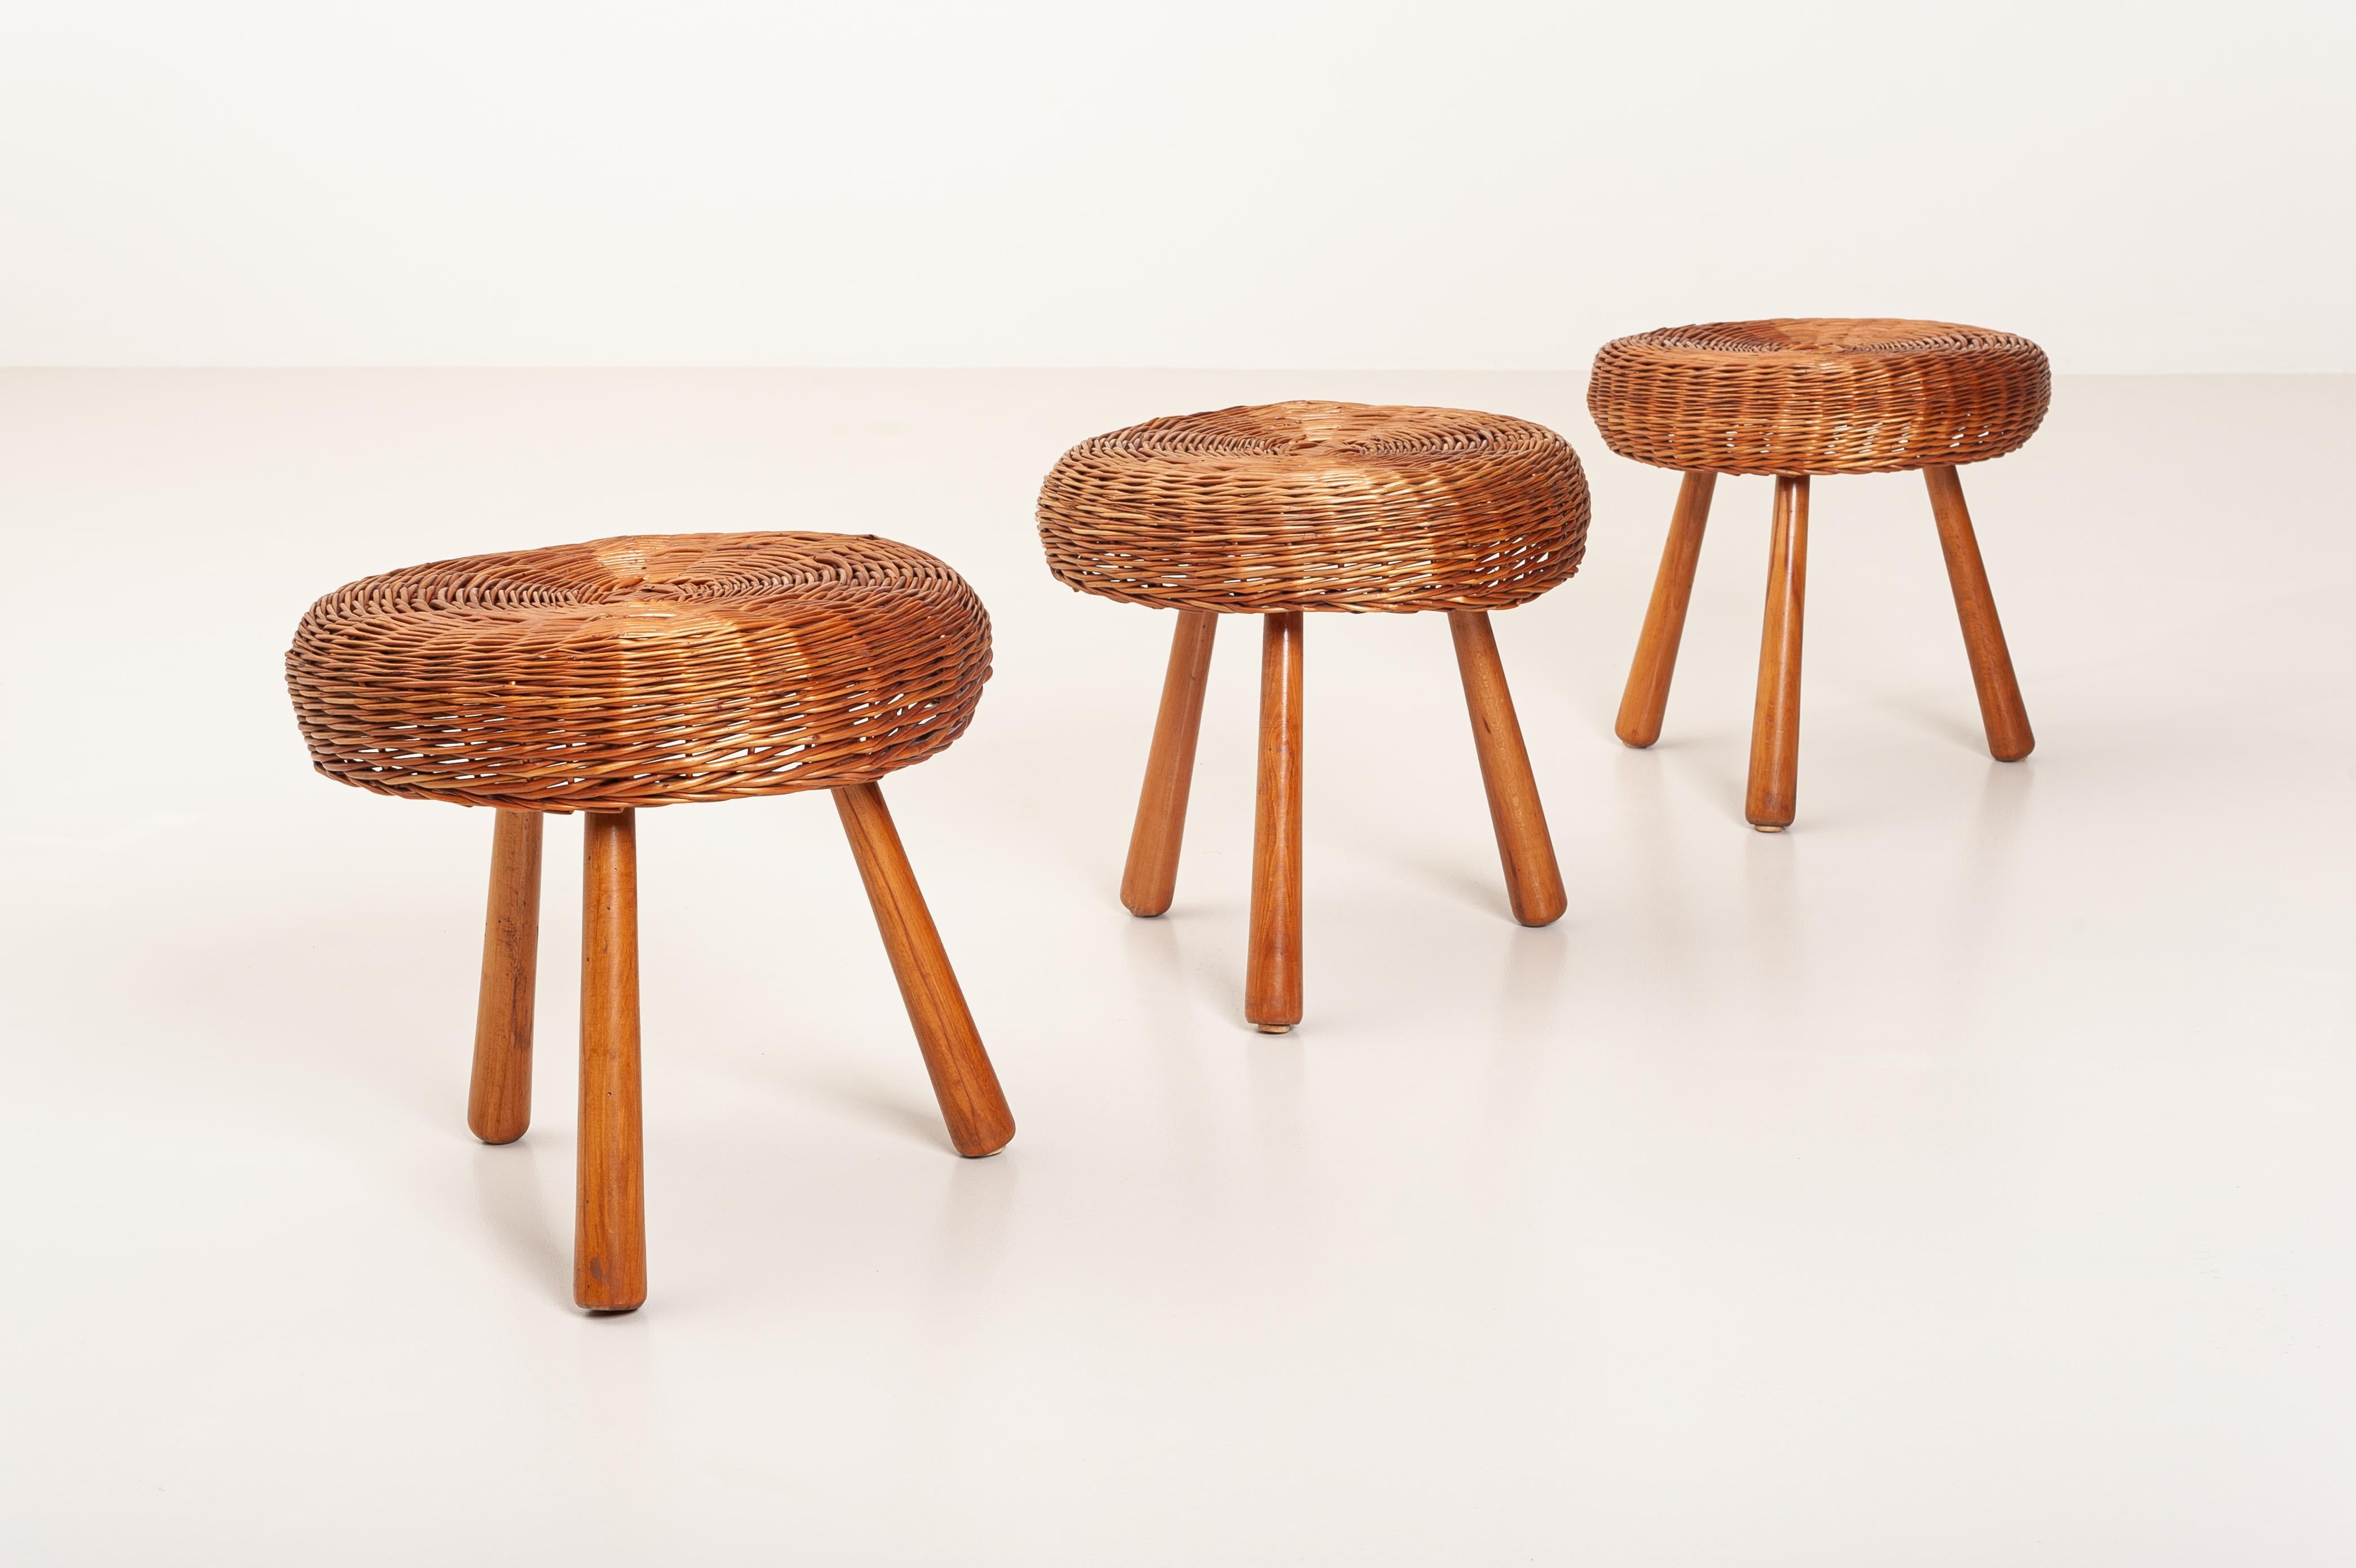 Tony Paul Attributed Stools, Woven Wicker, Solid Beech, United States, 1950s For Sale 3